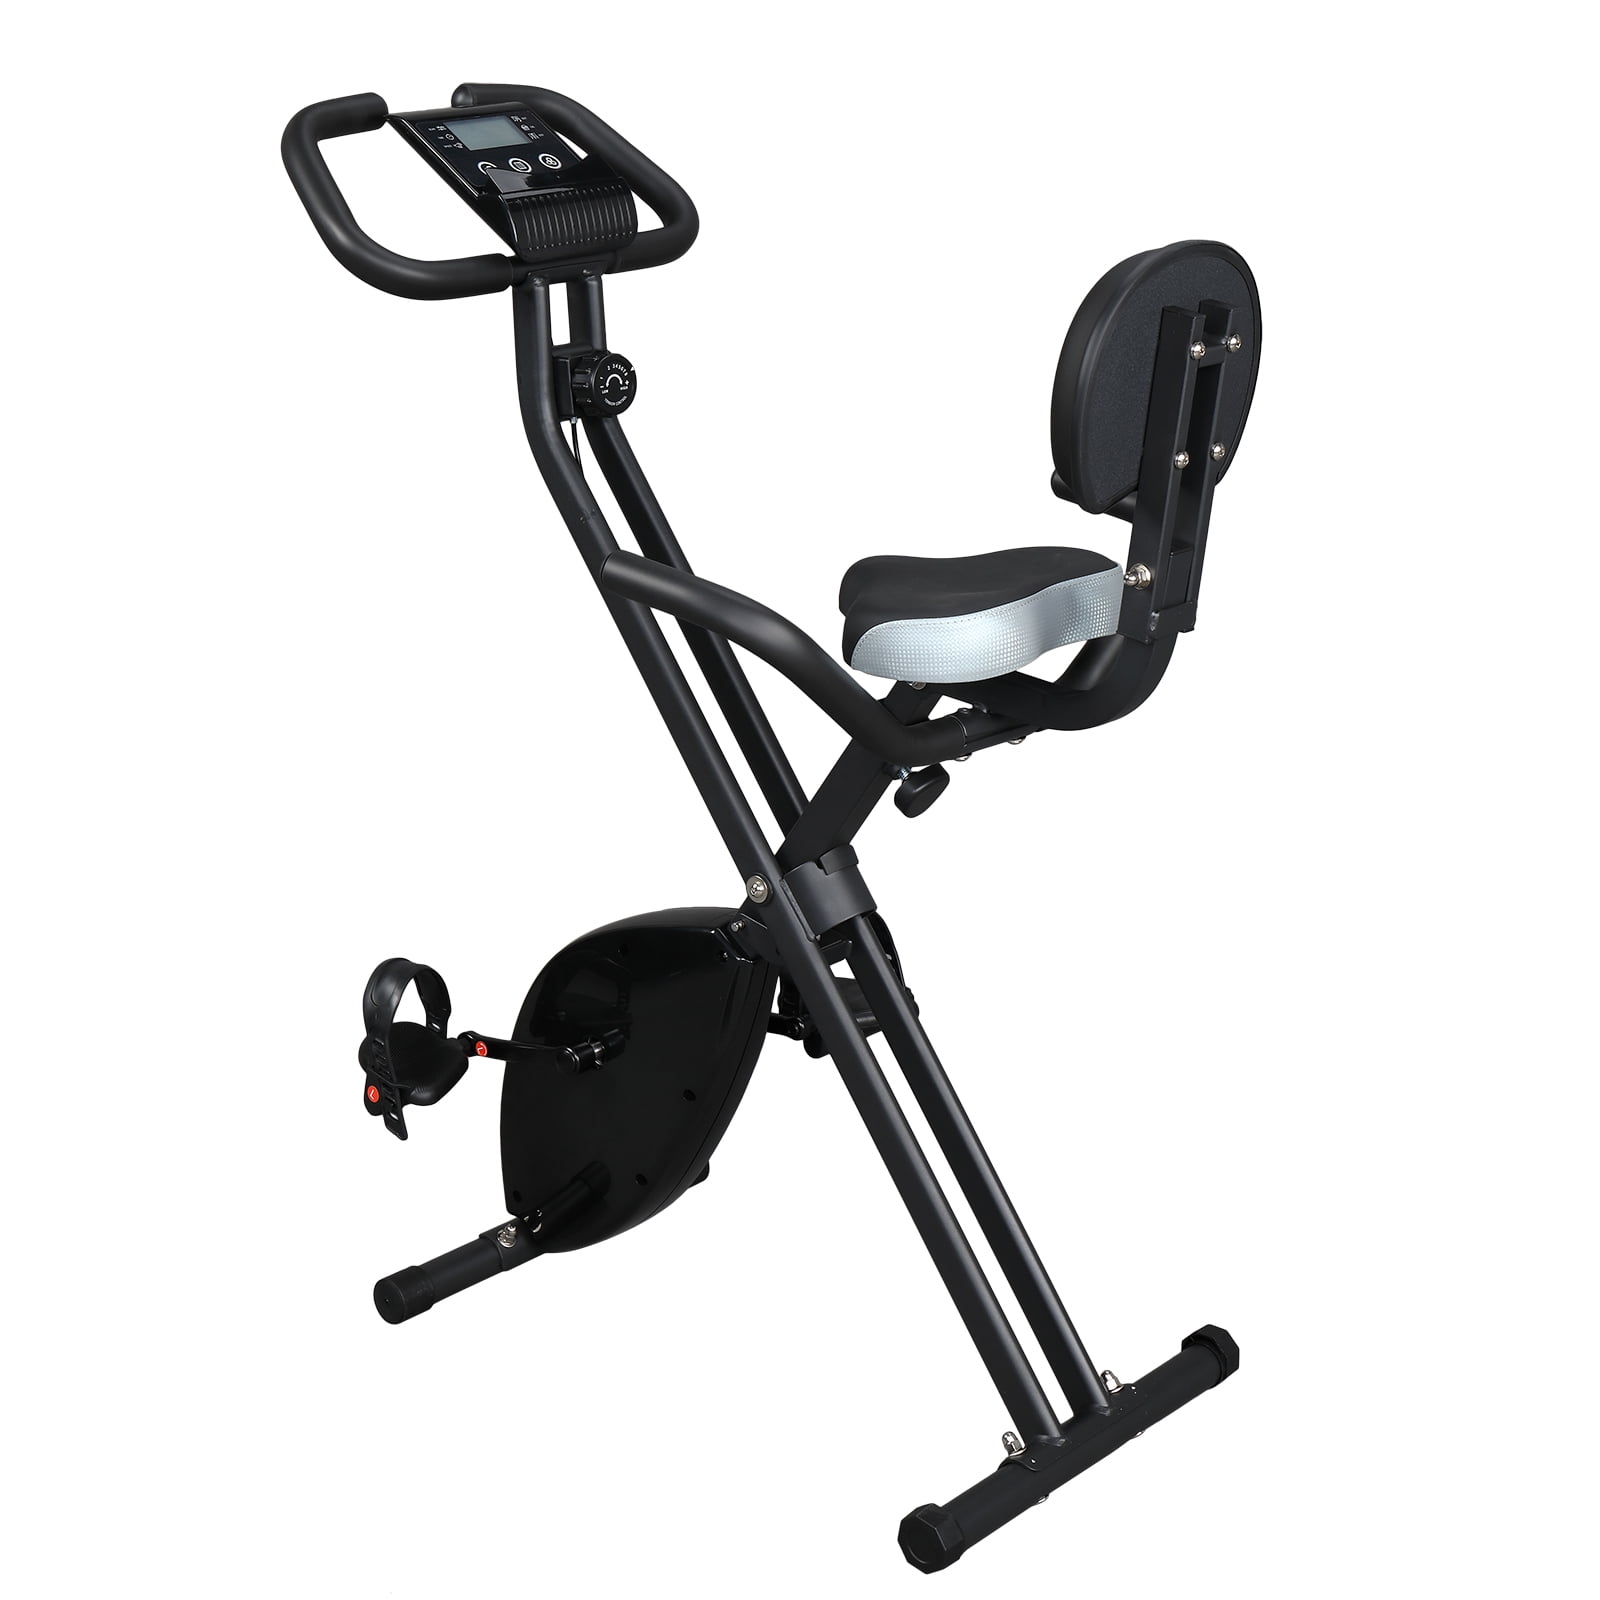 Details about   Indoor Folding Exercise Bike Resistance Cycling Cardio Bicycle Home Gym Workout 